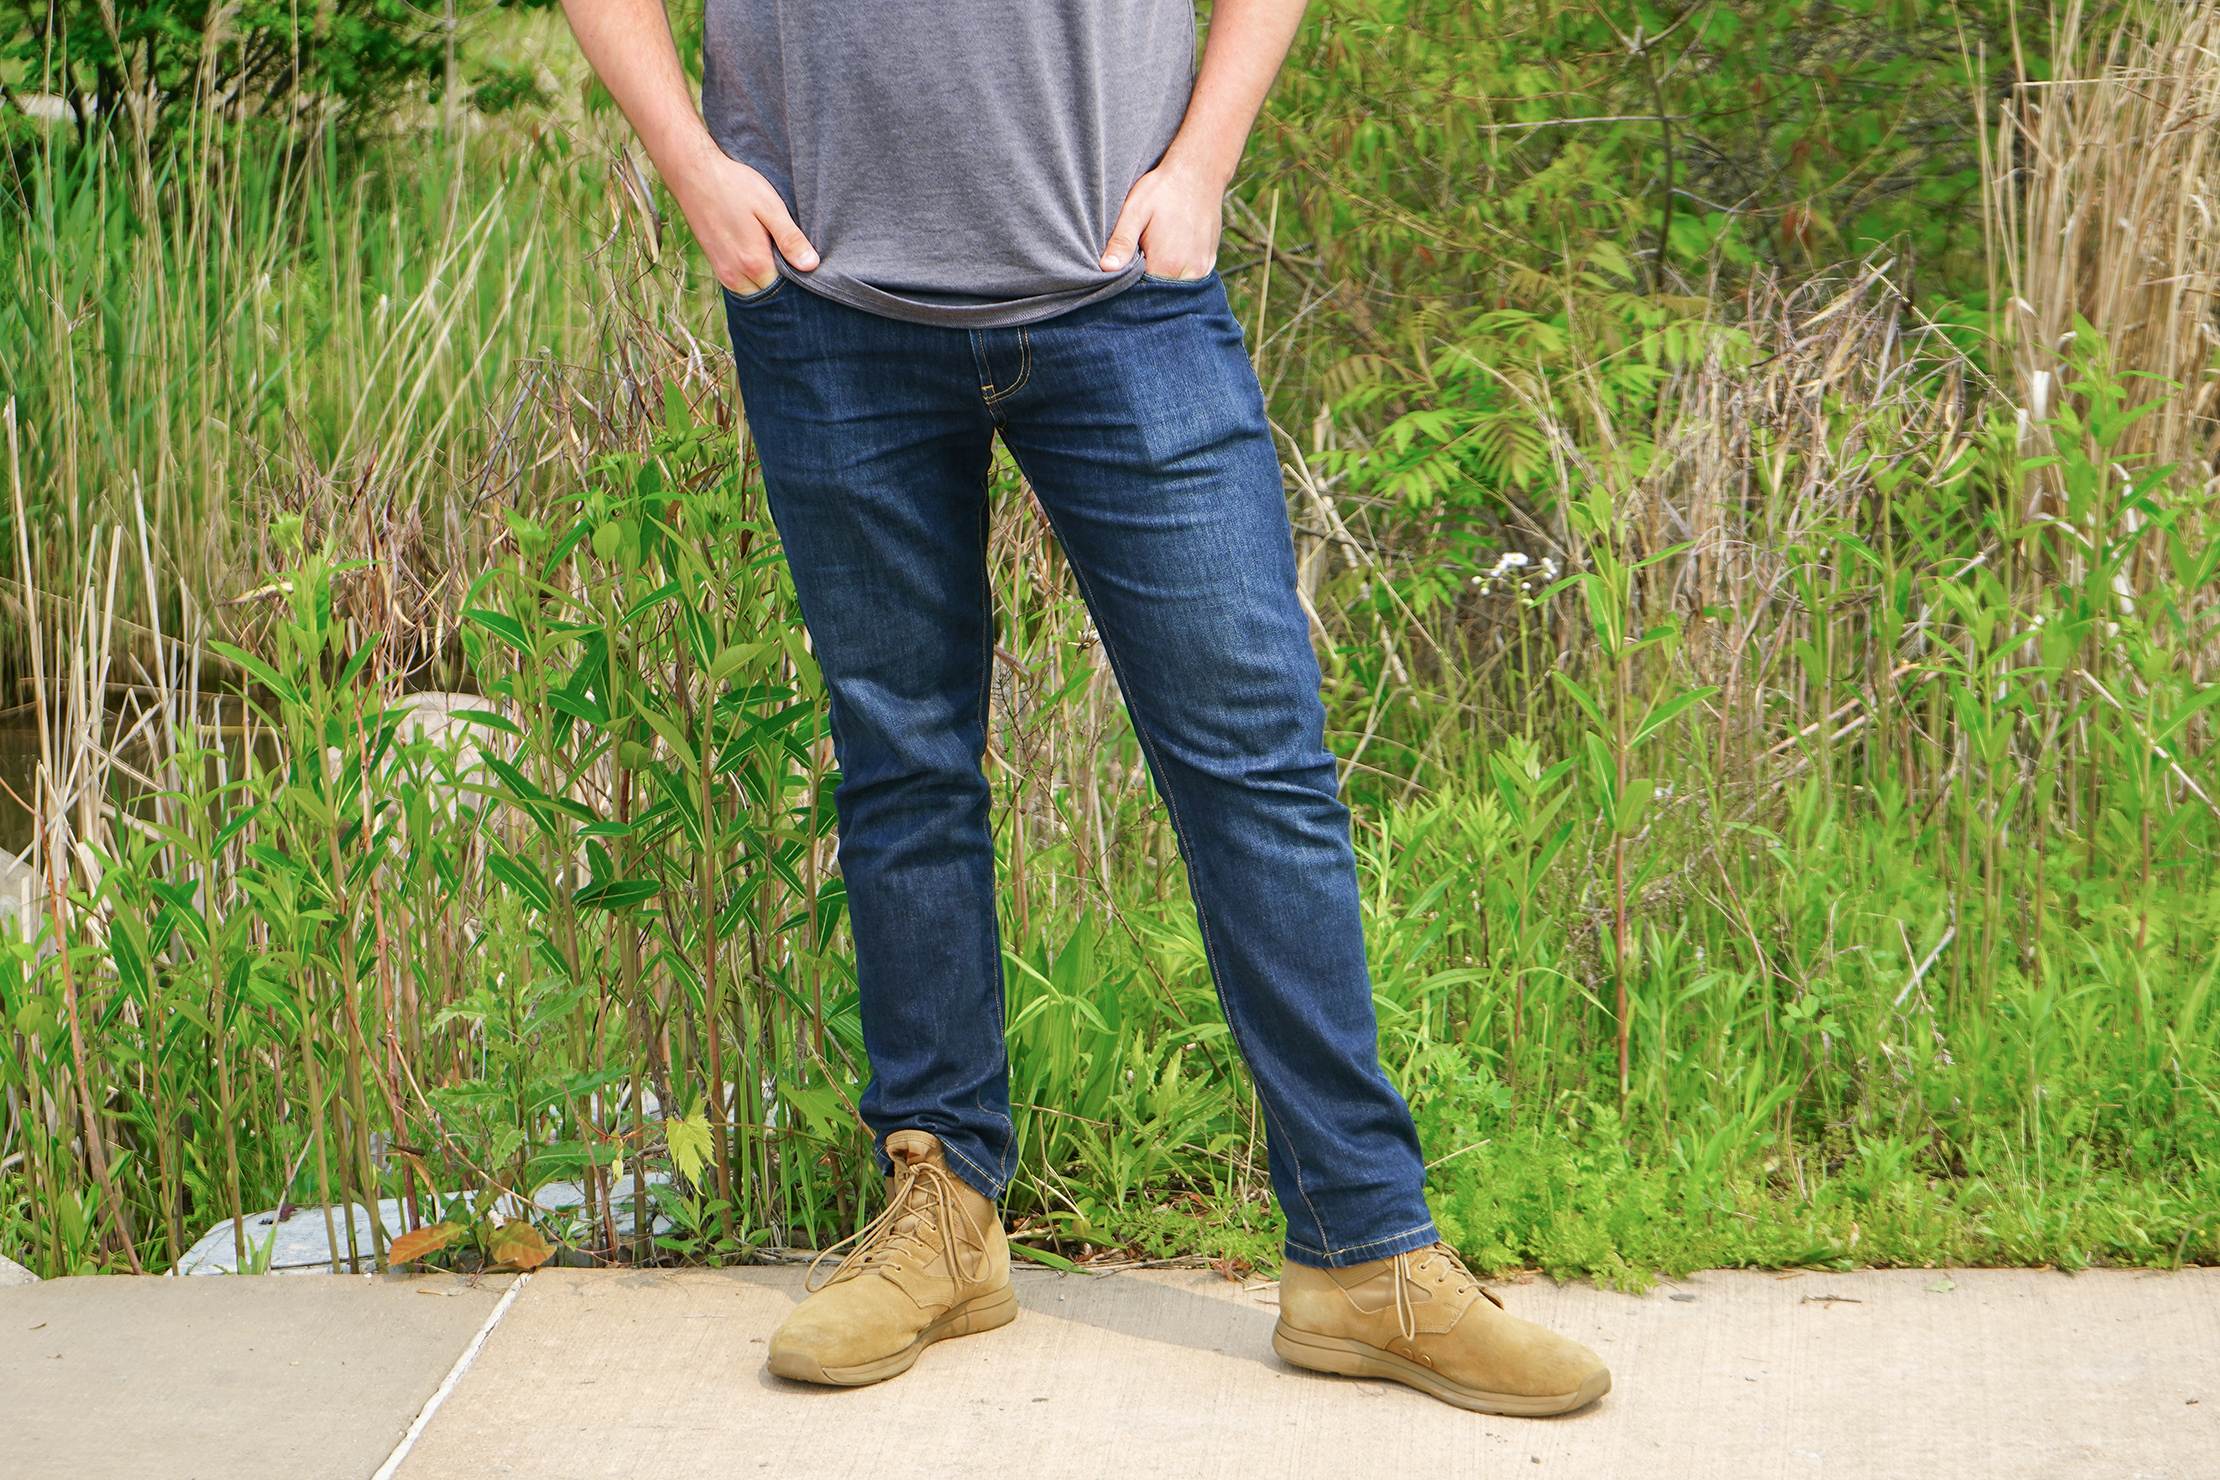 Bluffworks Departure Travel Jeans Review